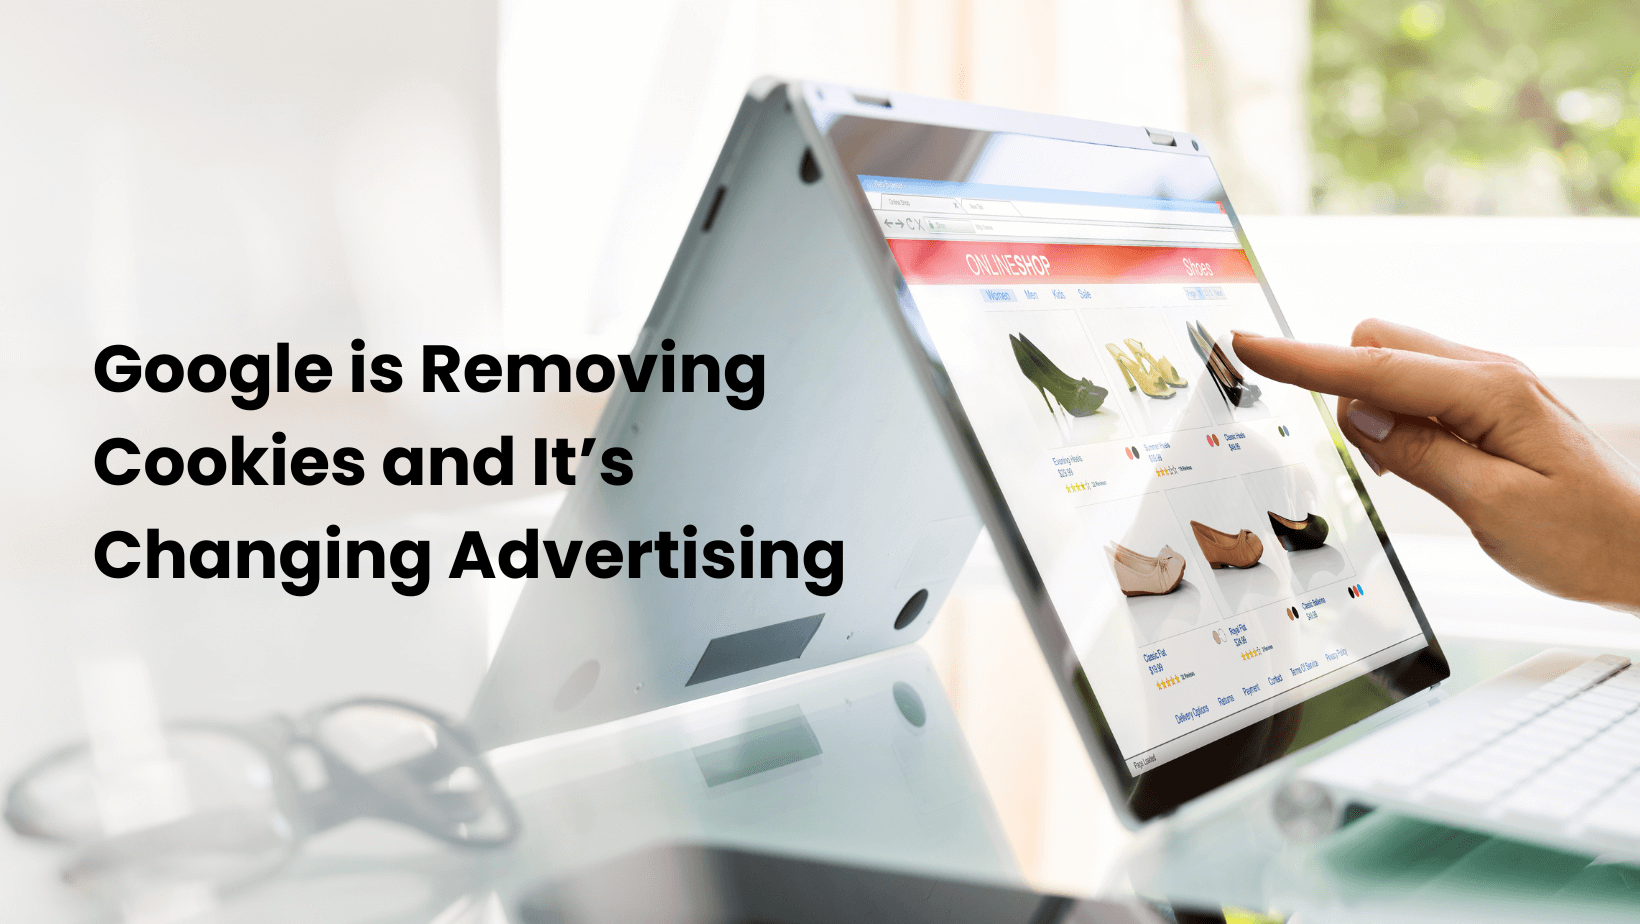 Guide to Google Removing Cookies and Changing Advertising